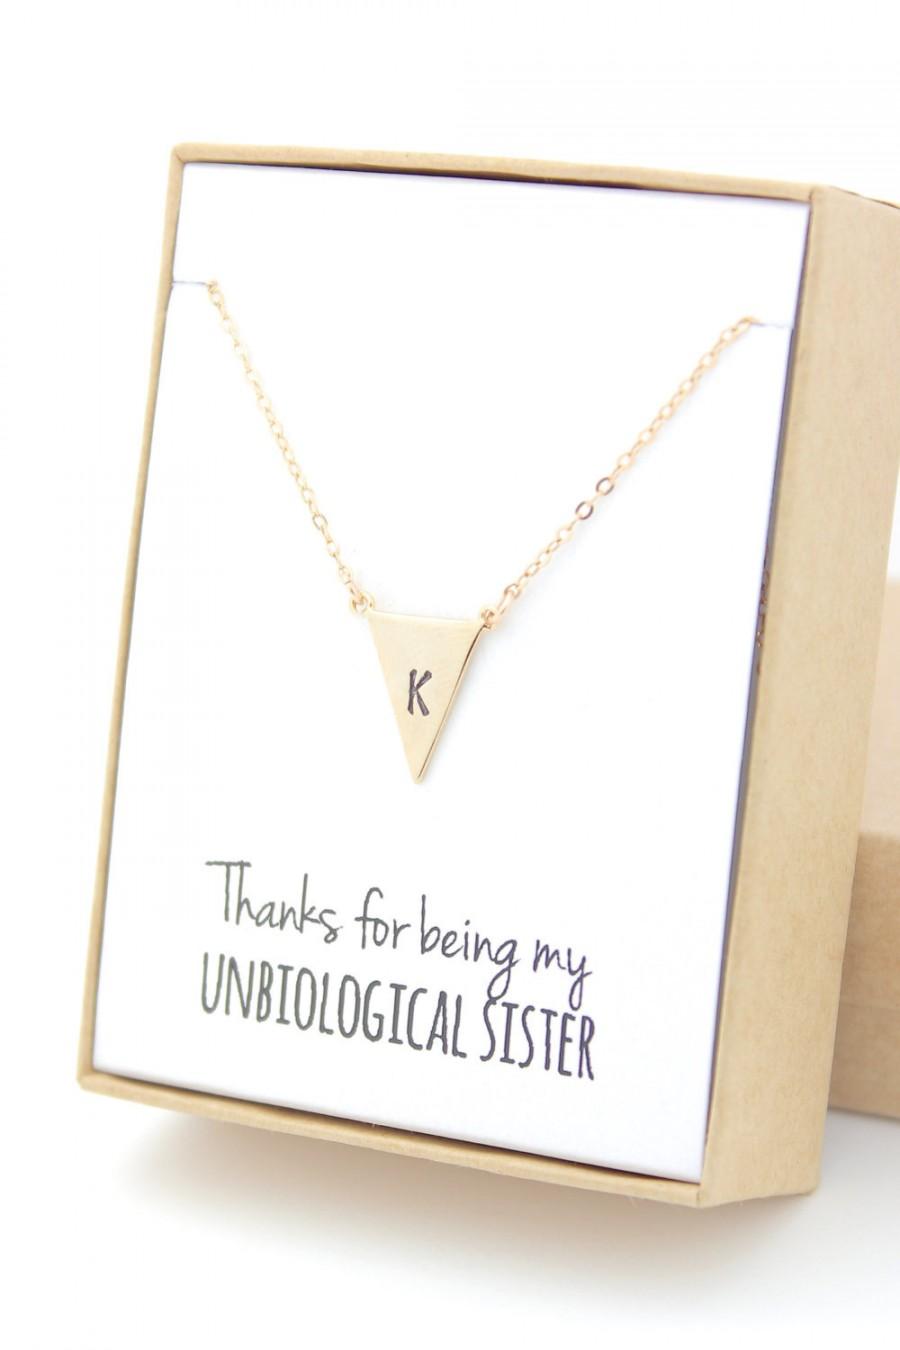 Свадьба - Gold Triangle Letter Necklace - Bridesmaid Gift Jewelry - Unbiological Sister - Personalized Necklace - Initial Letter - Larger Triangle